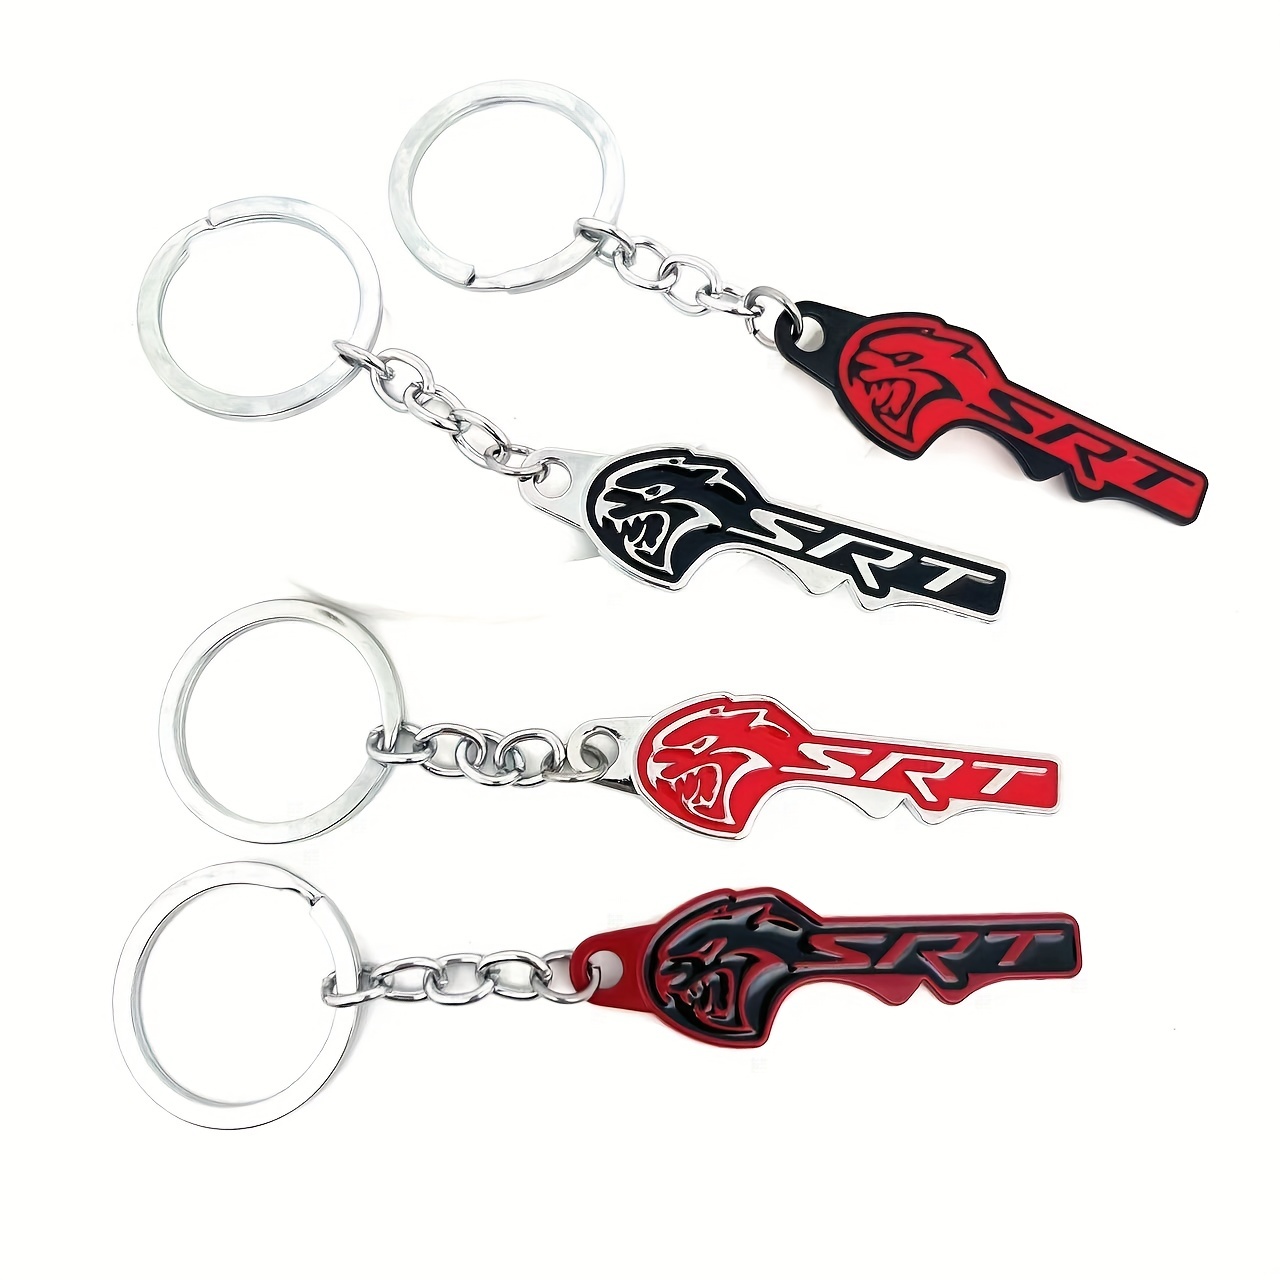  Krypland Automotive Keychain, White Car Keychains Metal and  Leather Key Chain for Motorcycles SUV Vehicle for Men Wome Gifts :  Automotive